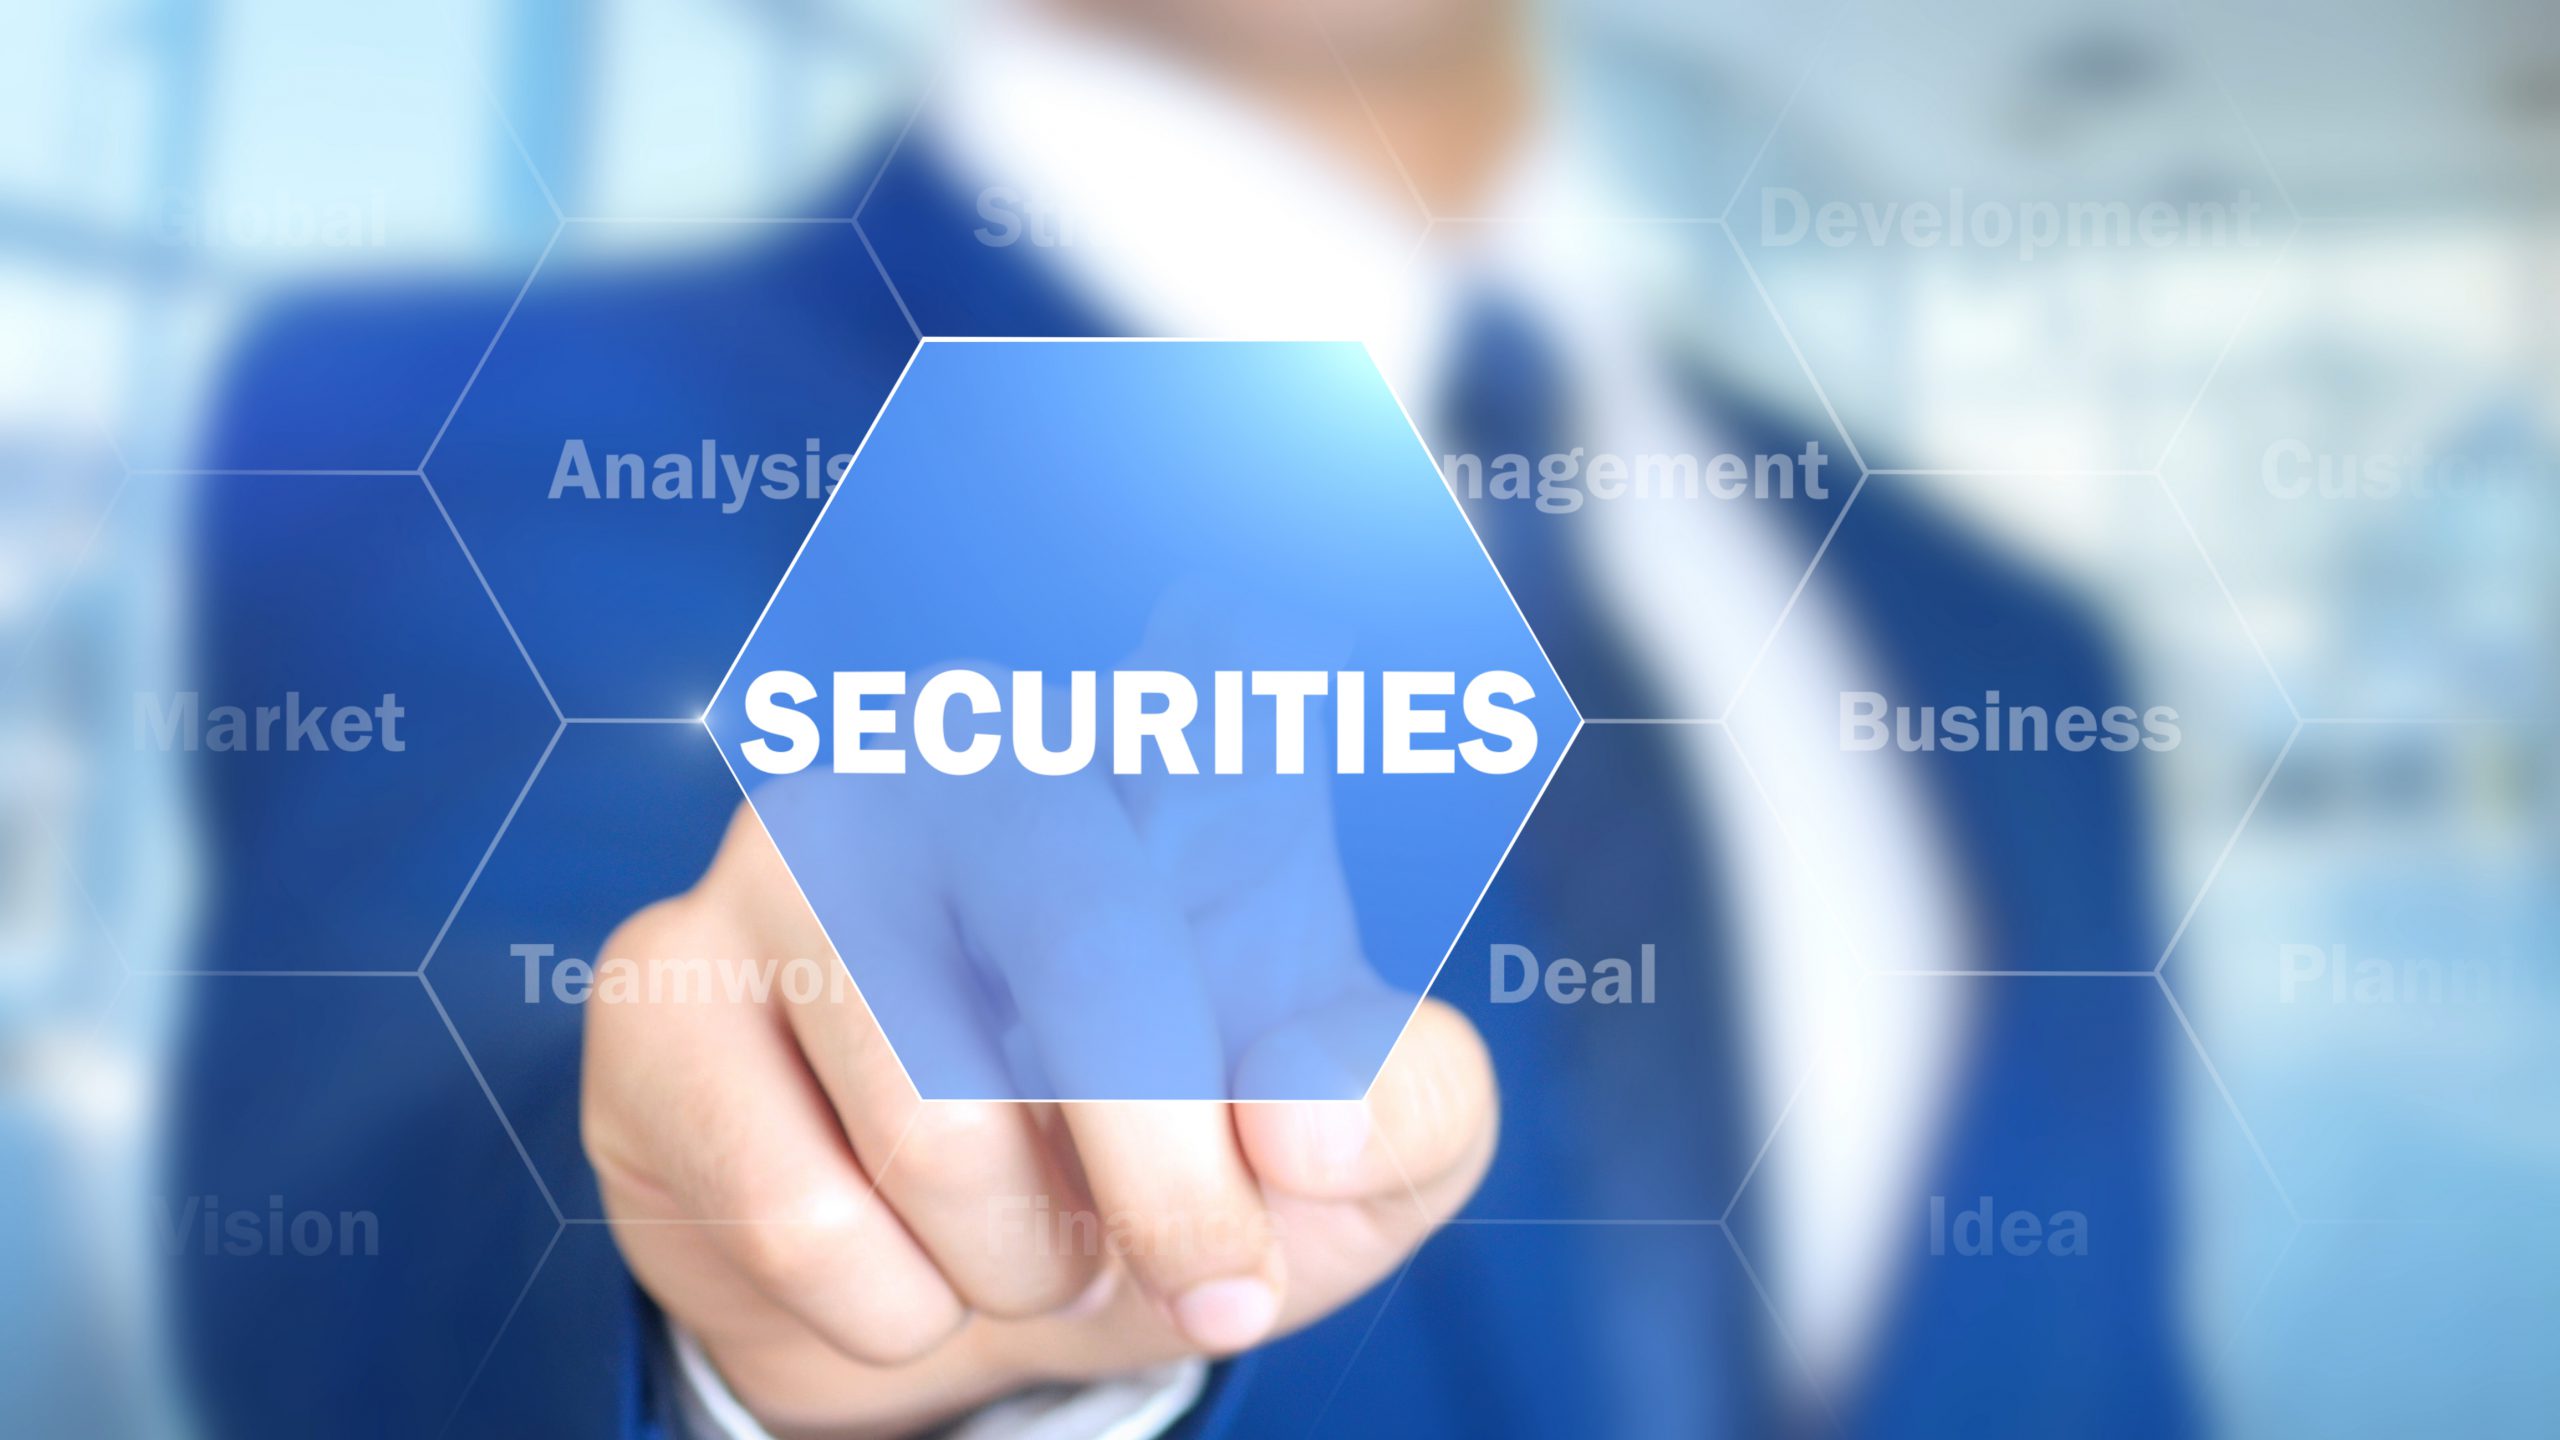 Featured image for “What is a Security? From the Division of Securities.”